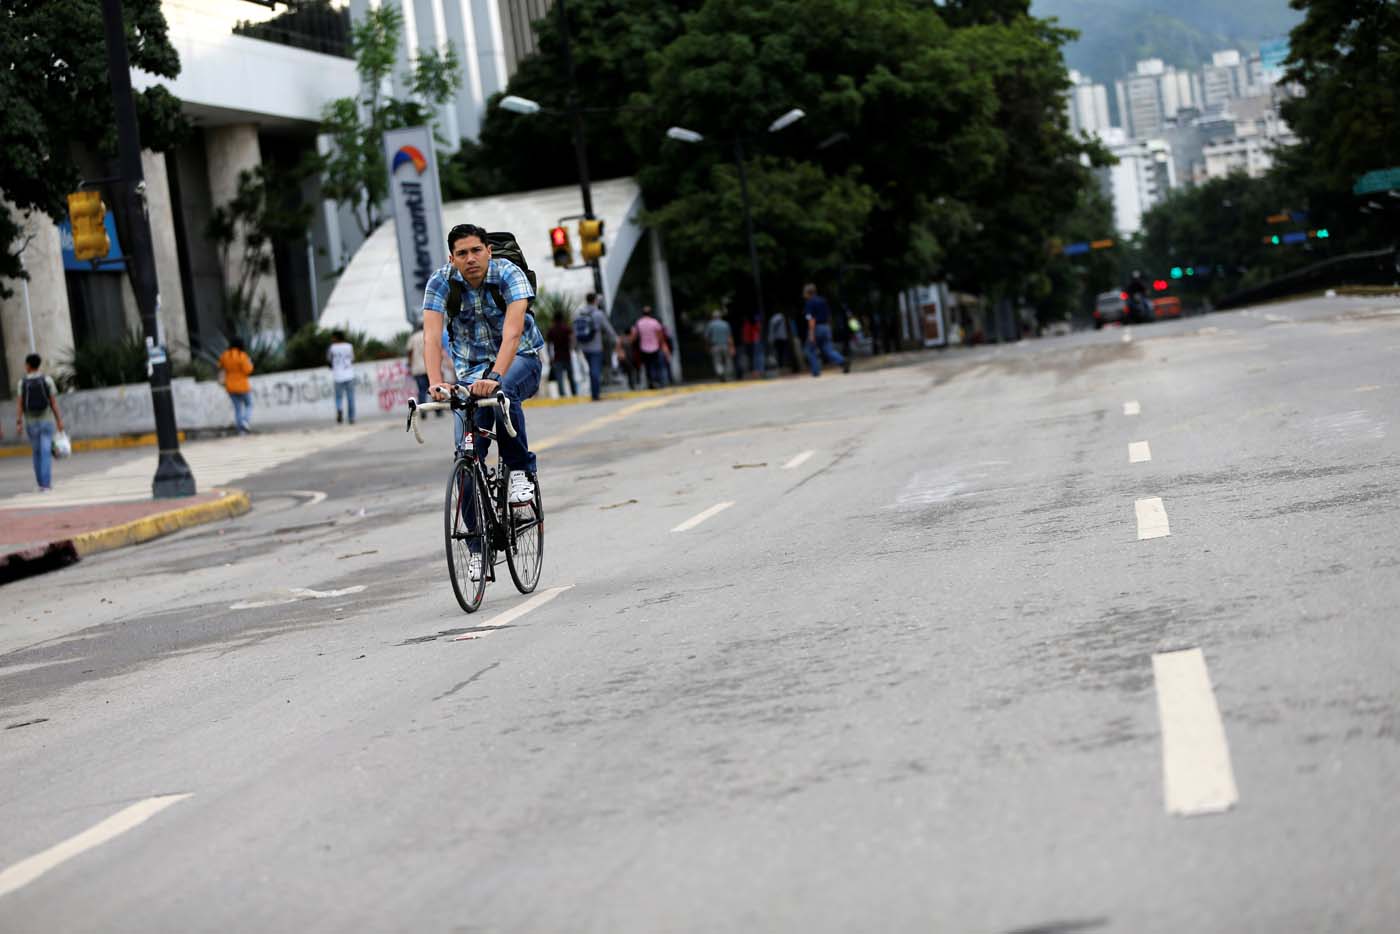 A man rides a bike along an empty road during a strike called to protest against Venezuelan President Nicolas Maduro's government in Caracas, Venezuela, July 20, 2017. REUTERS/Andres Martinez Casares